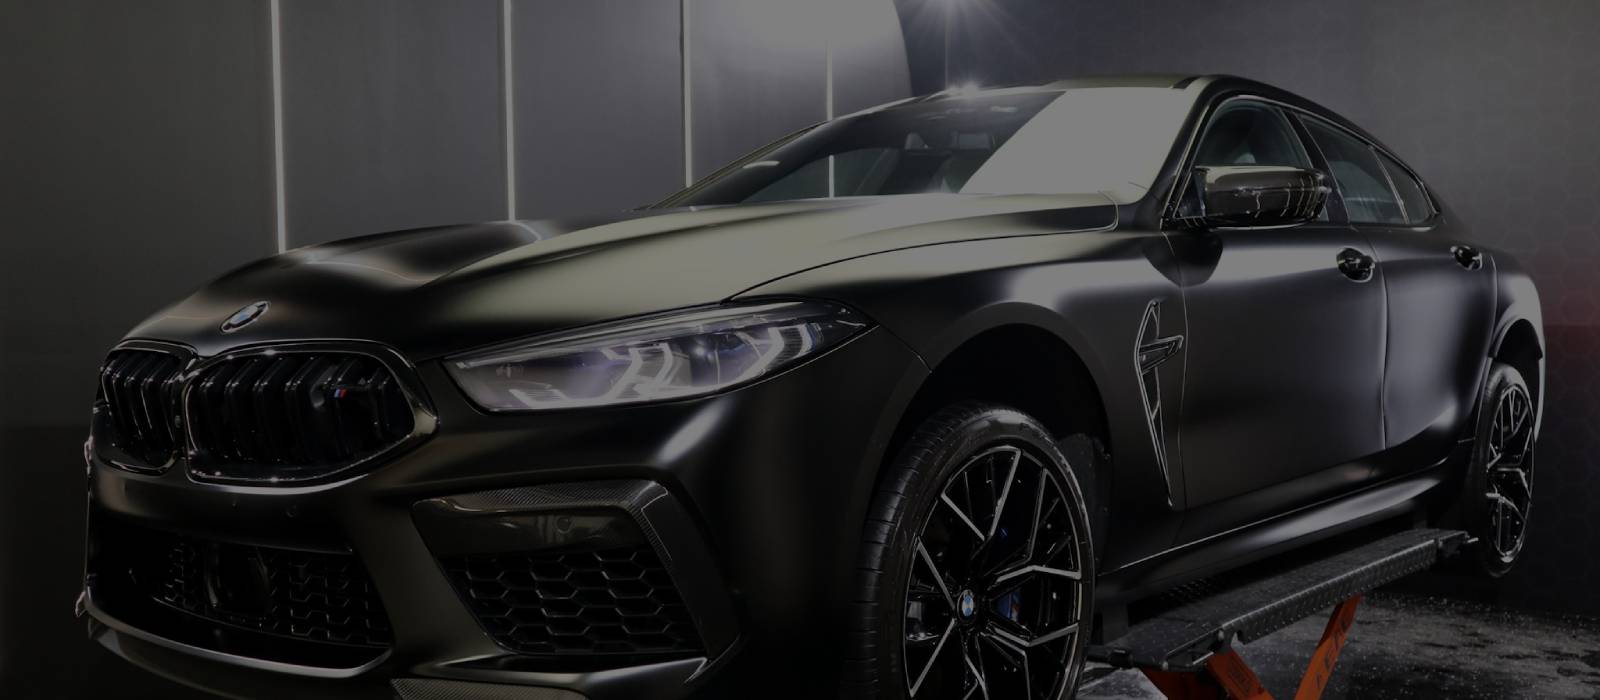 All You Need to Know About Paint Protection Film